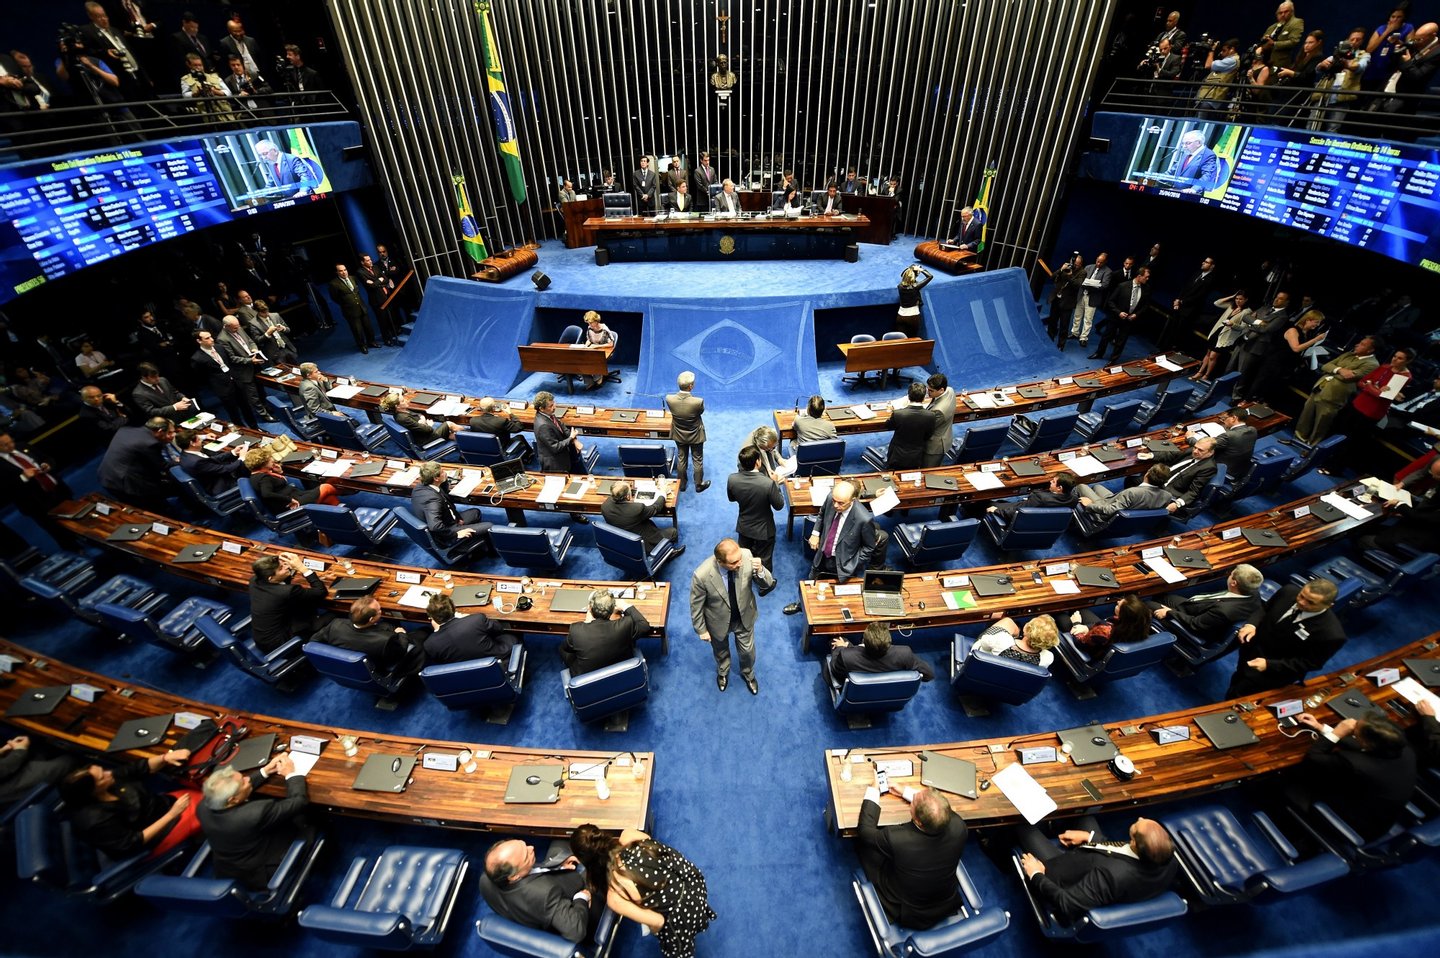 Picture taken during a Brazilian Senate's session to form a committee that will consider whether to impeach President Dilma Rousseff, in Brasilia, on April 25, 2016. Brazil's Senate met Monday to form a committee that will consider whether to impeach Rousseff, who has accused her opponents of mounting a constitutional coup. She is accused of illegal government accounting maneuvers, but says she has not committed an impeachment-worthy crime. The Senate committee -- comprising 21 of the 81 senators -- was to debate Rousseff's fate for up to 10 working days before making a recommendation to the full upper house. / AFP / EVARISTO SA (Photo credit should read EVARISTO SA/AFP/Getty Images)